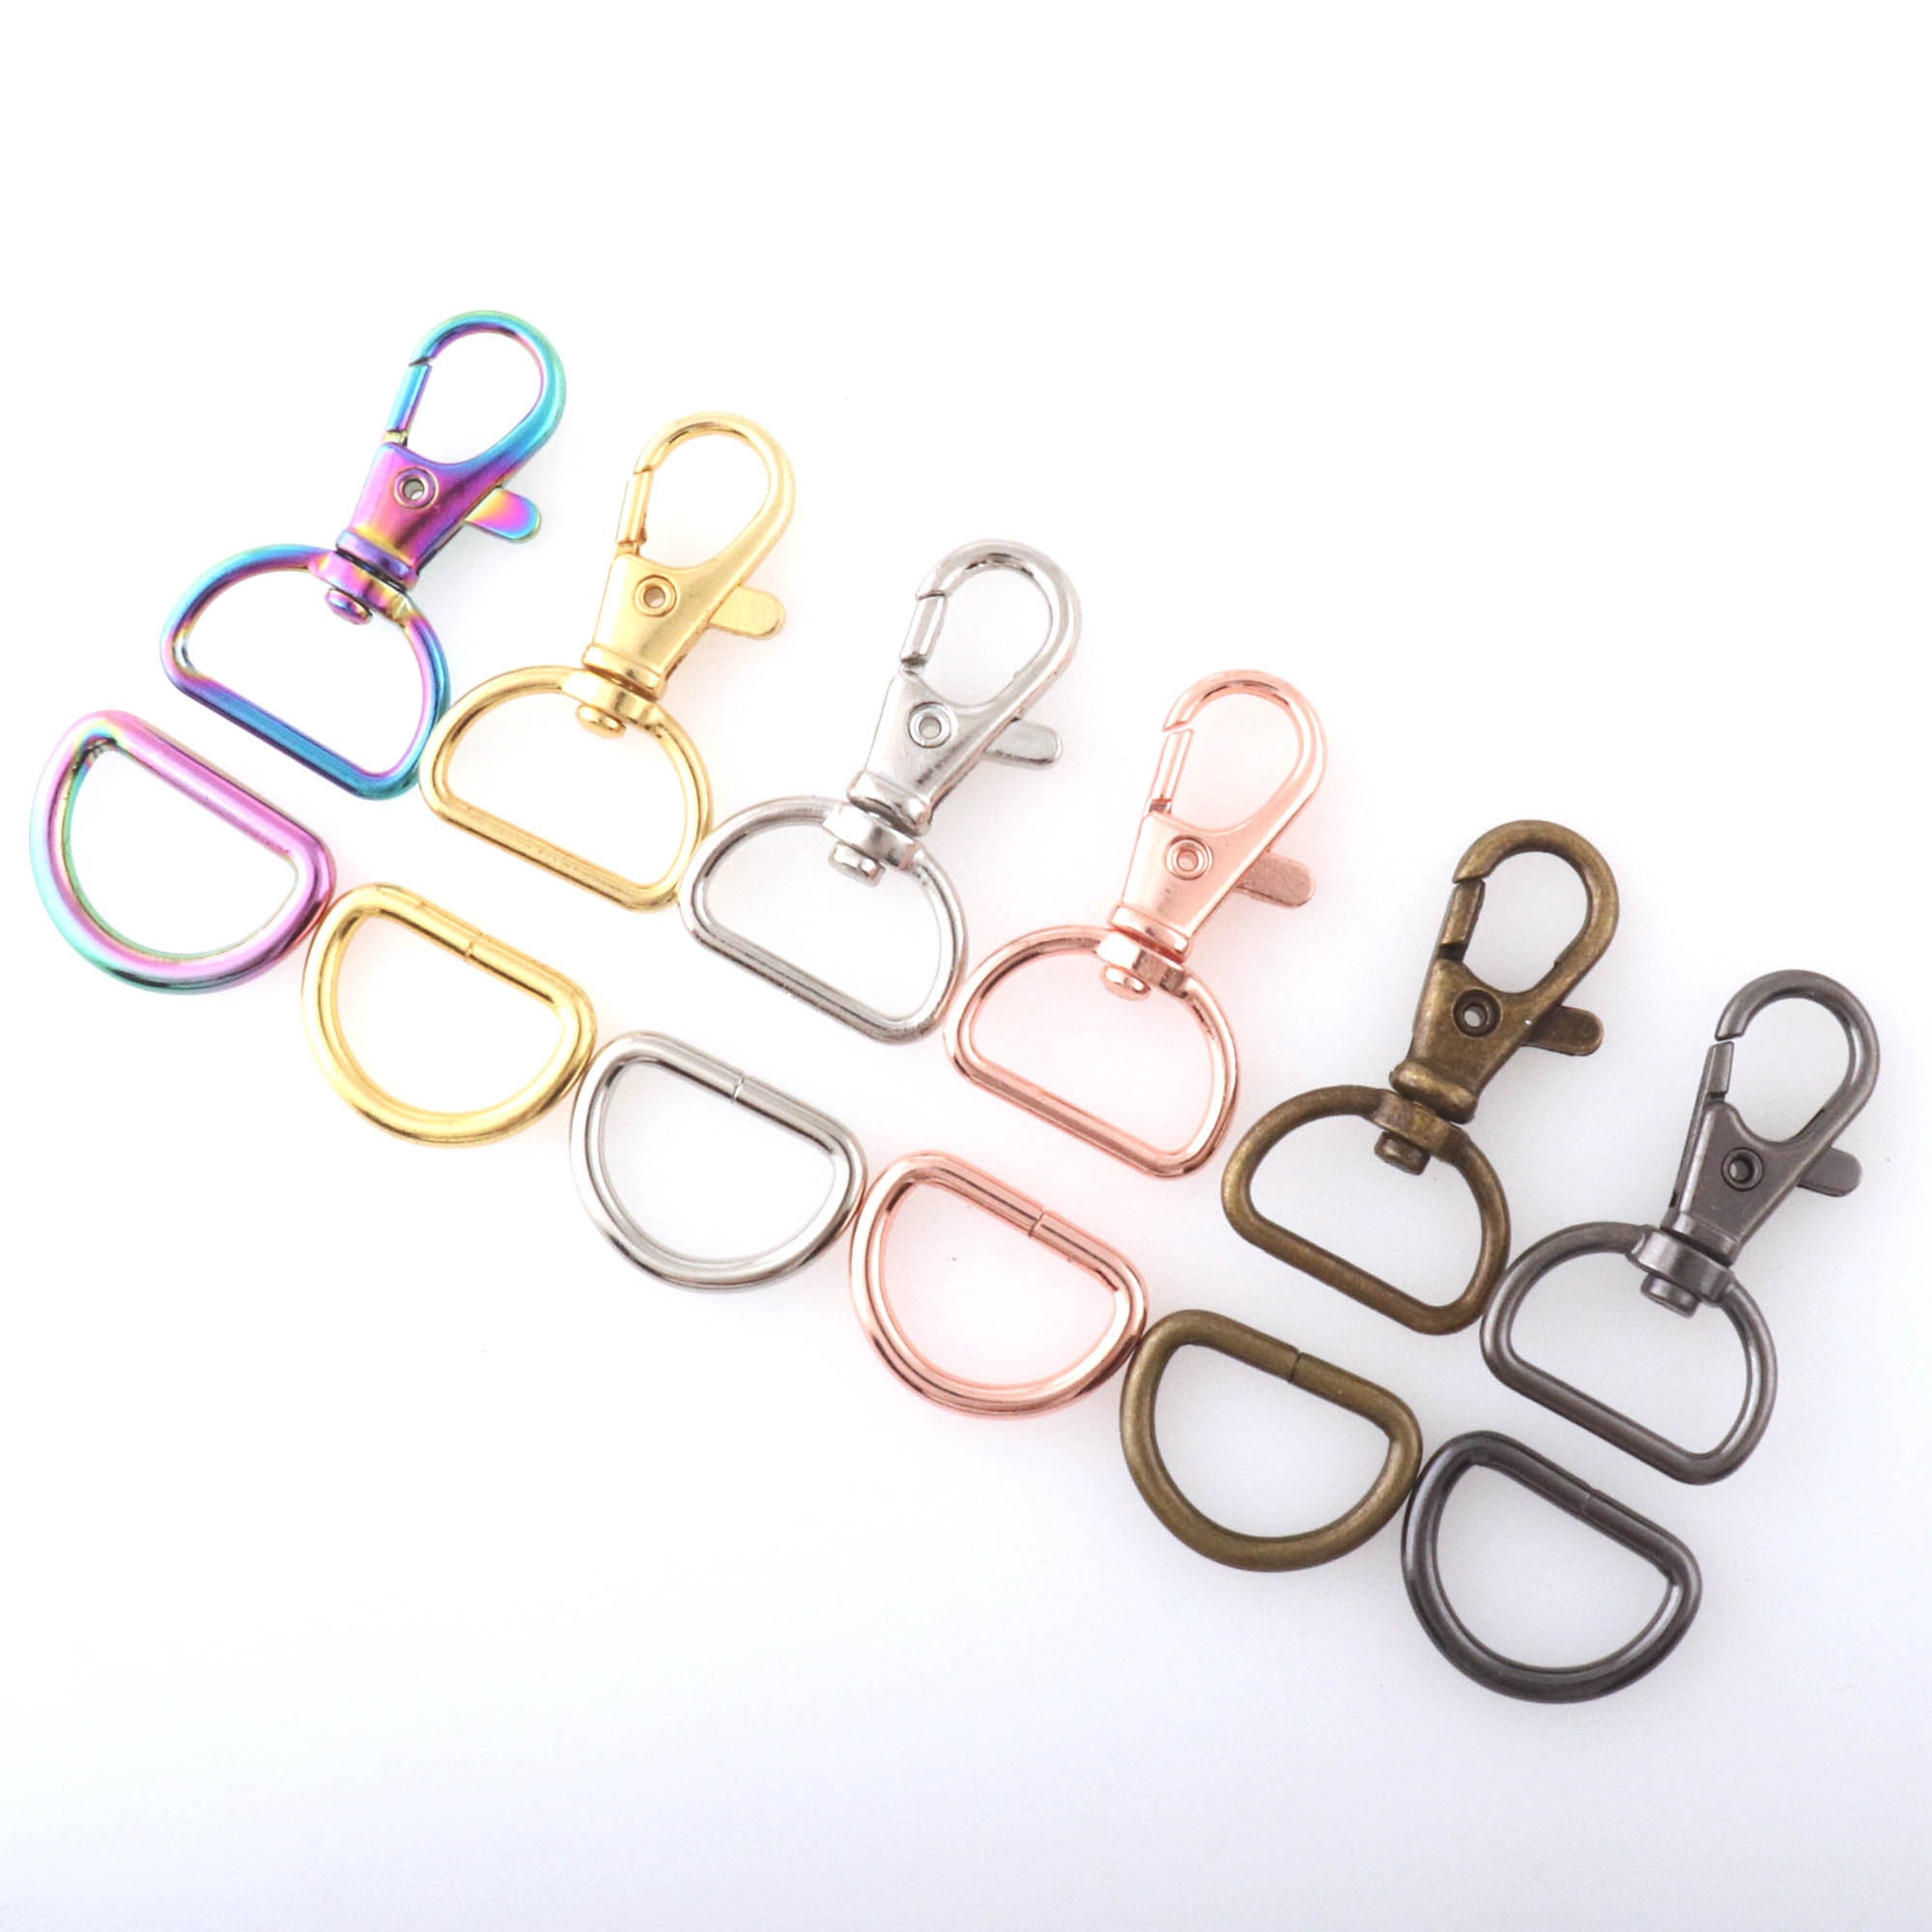 5 pcs Retro Lobster Claw Clasps Swivel Trigger Clips Snap Hook for webbing 20mm 